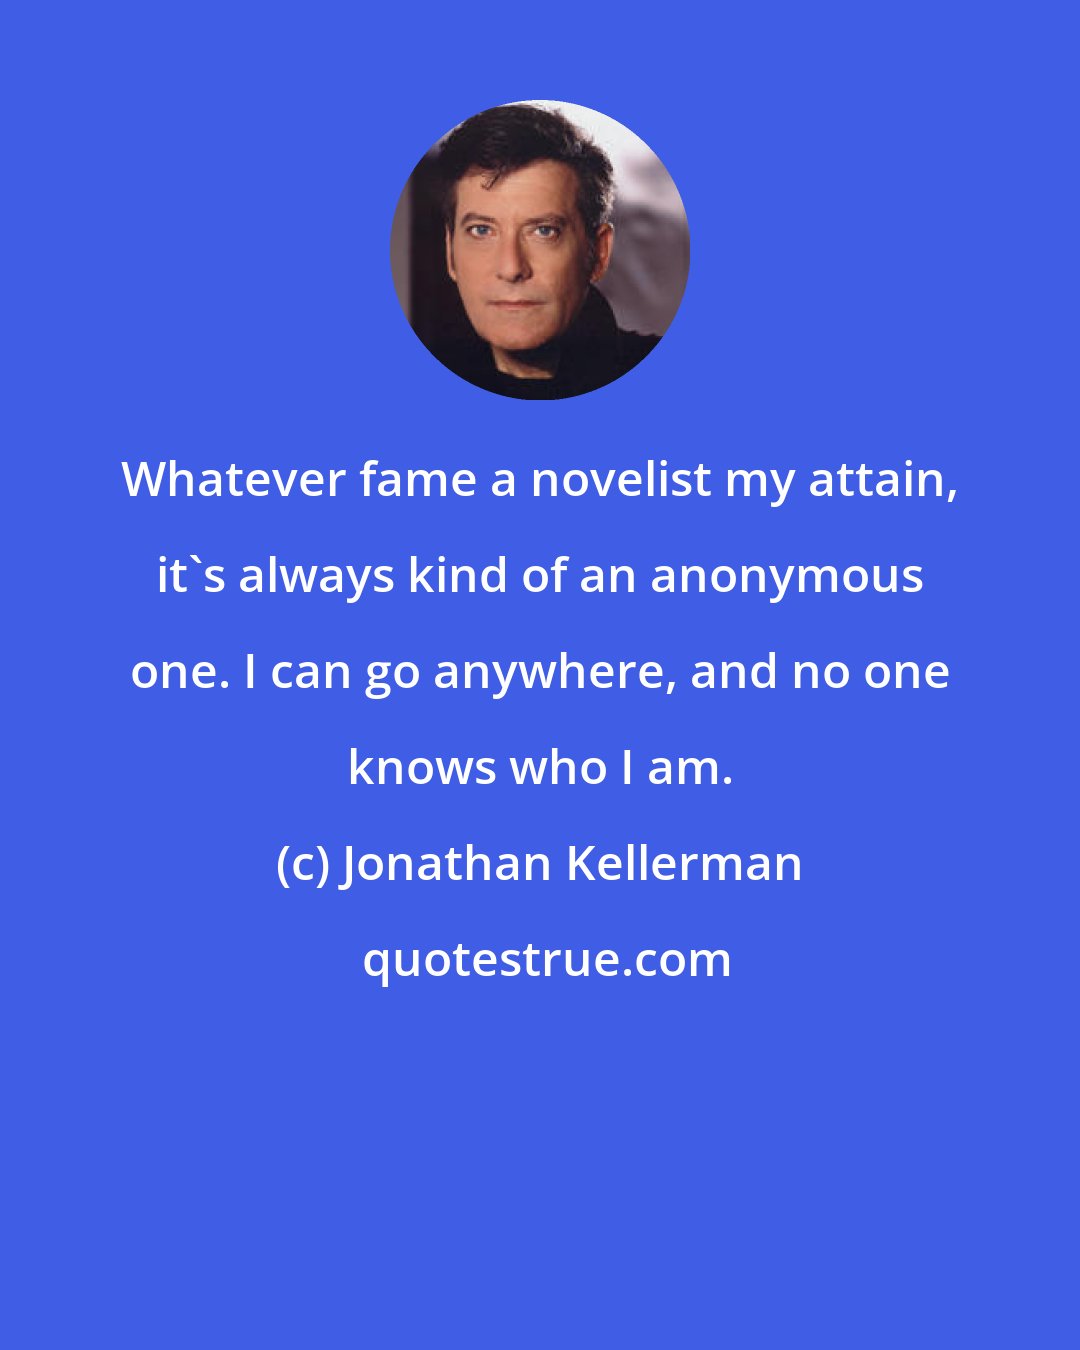 Jonathan Kellerman: Whatever fame a novelist my attain, it's always kind of an anonymous one. I can go anywhere, and no one knows who I am.